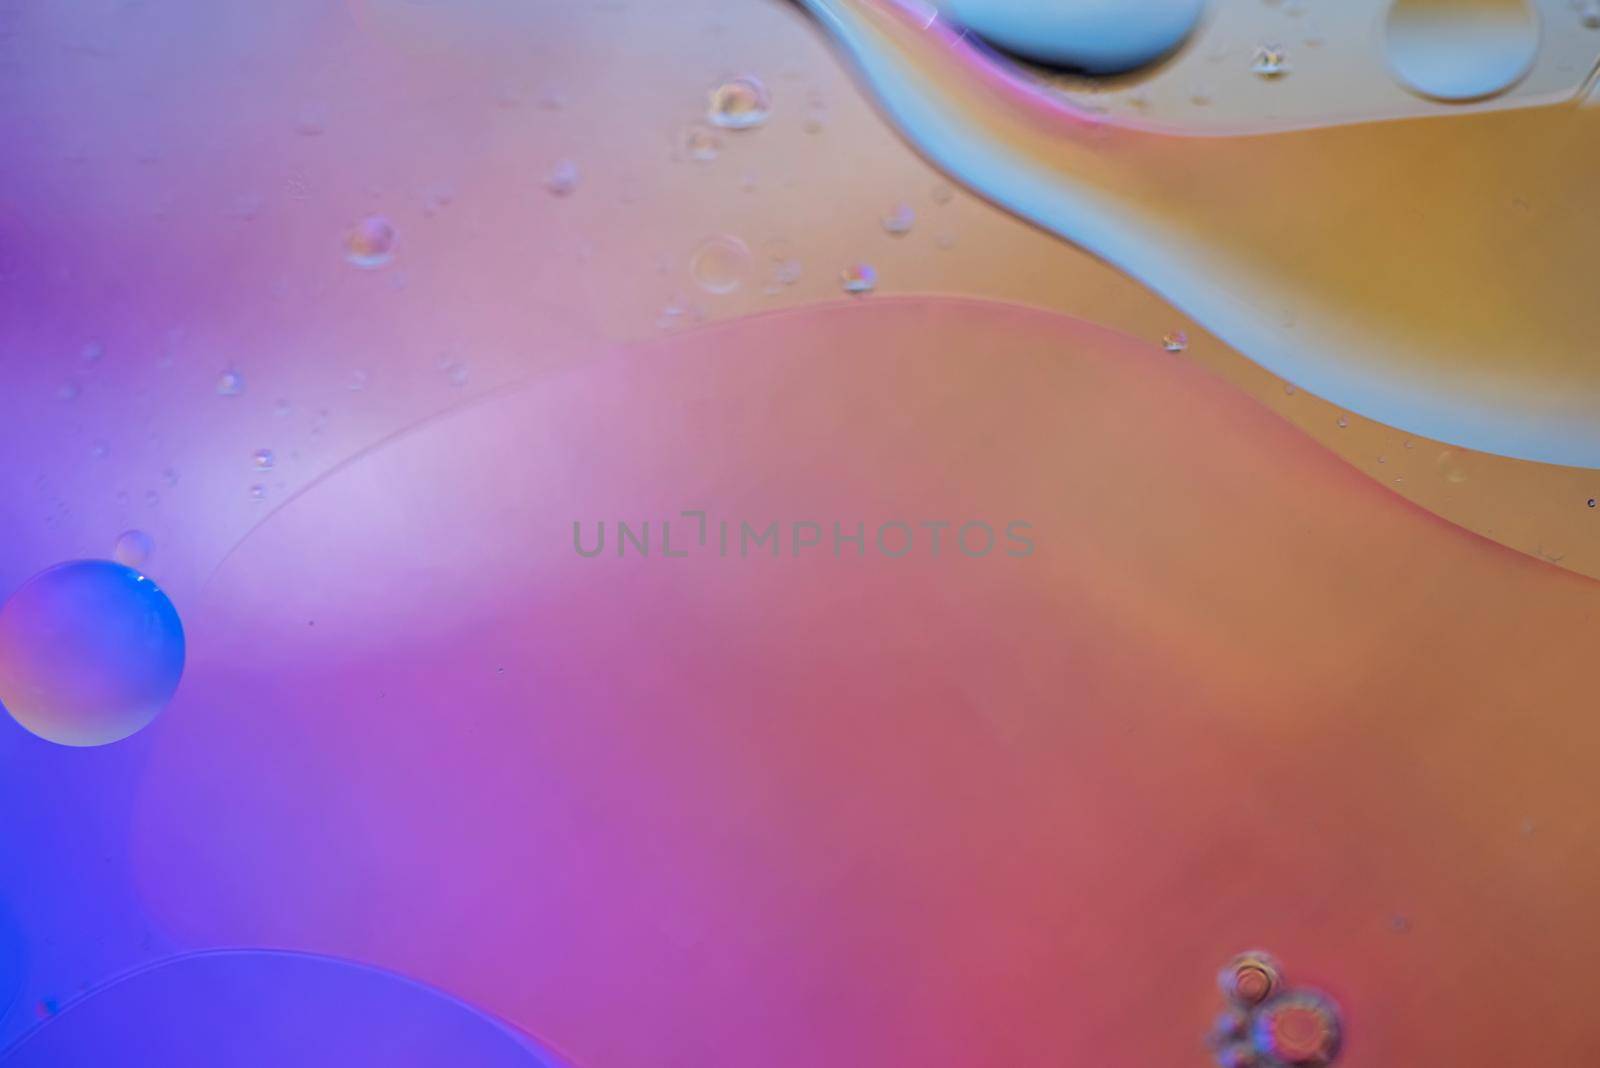 Oil drops in water. Defocused abstract psychedelic pattern image orange and purple colored. Abstract background with colorful gradient colors. DOF.